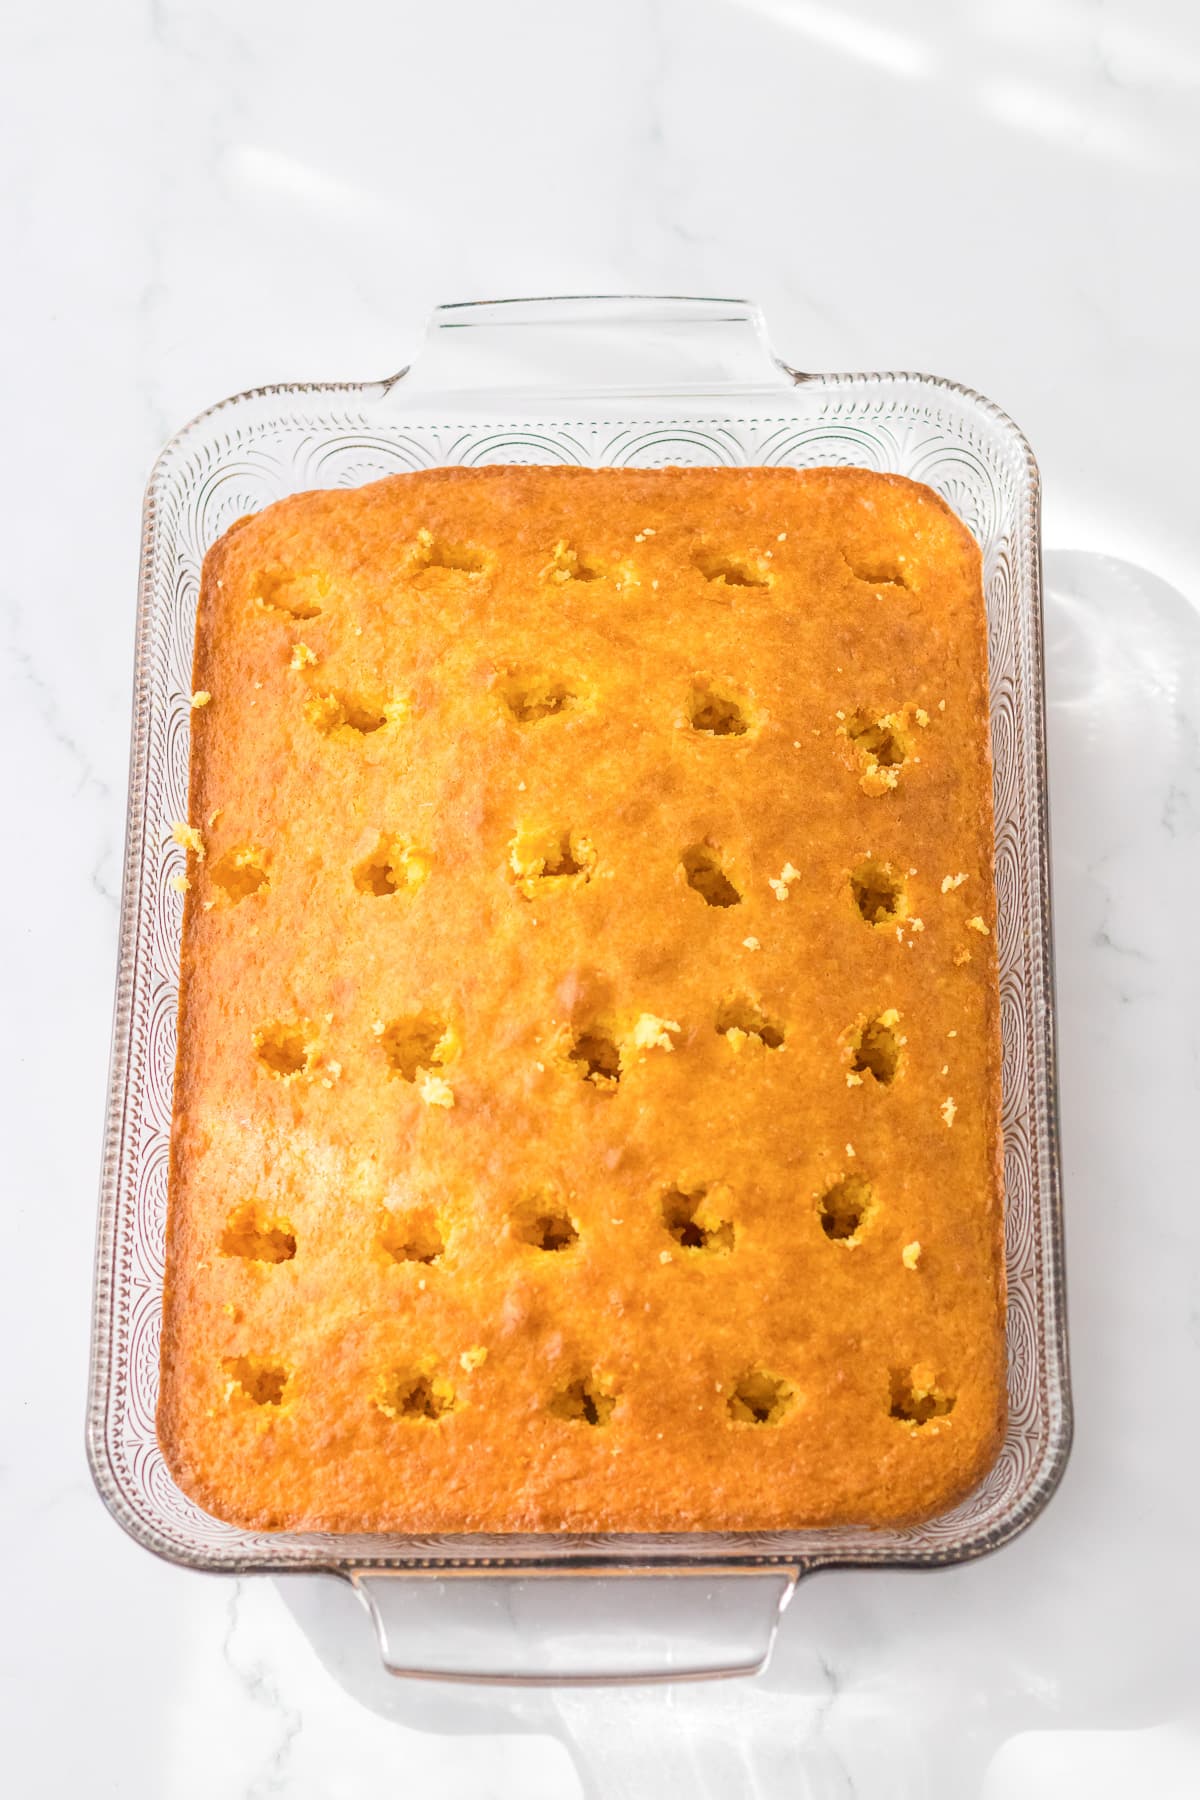 Yellow cake baked in a large rectangular pan with rows of holes poked in the cake.